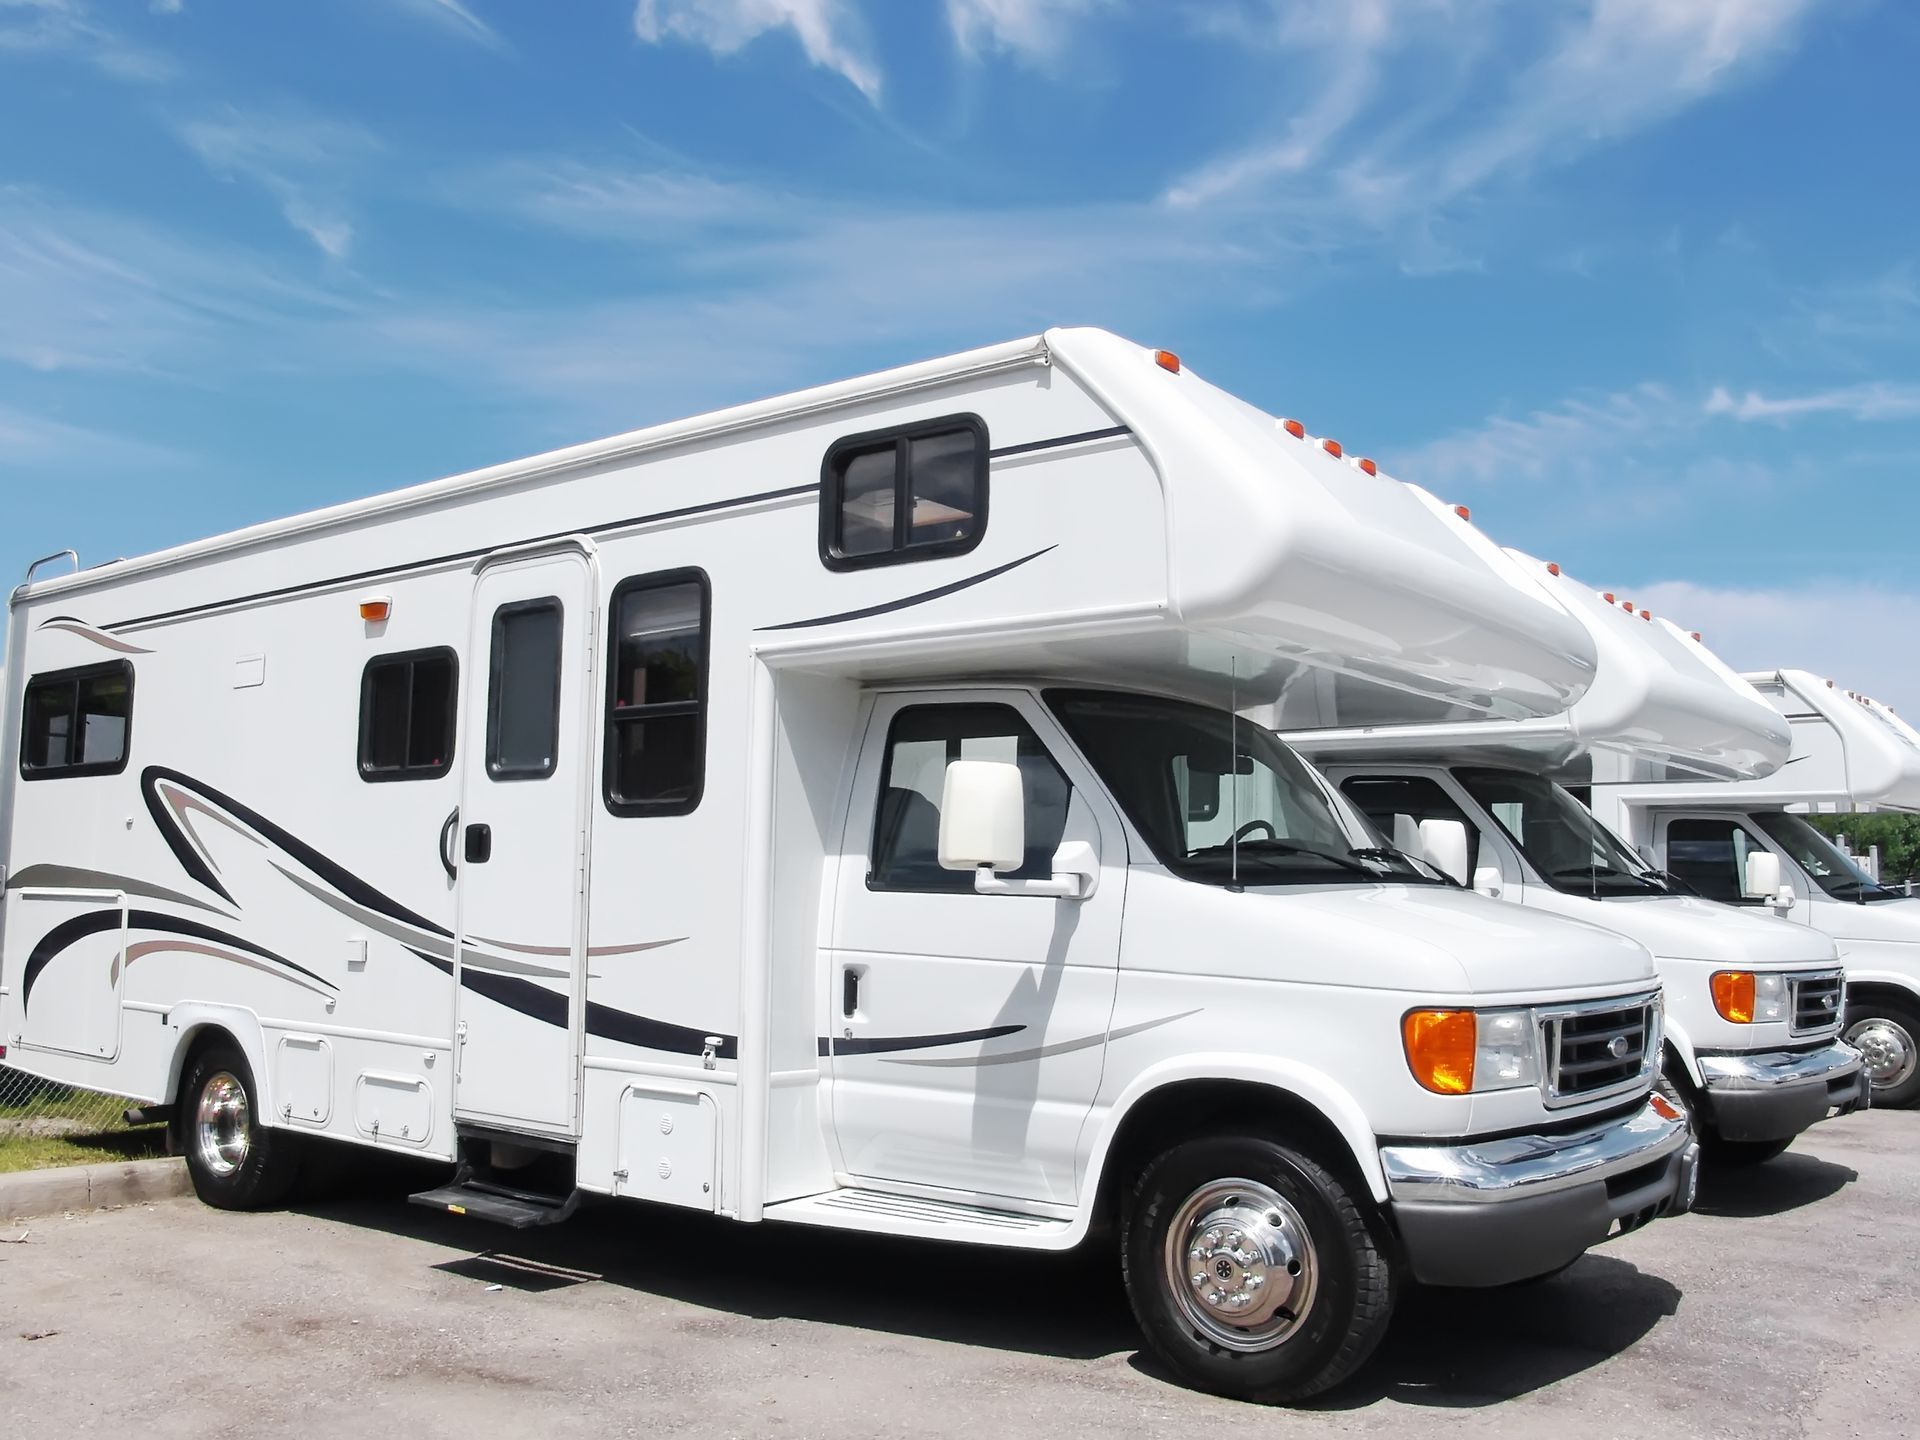 a row of white recreational vehicles parked in a parking lot for detailing and cleaning